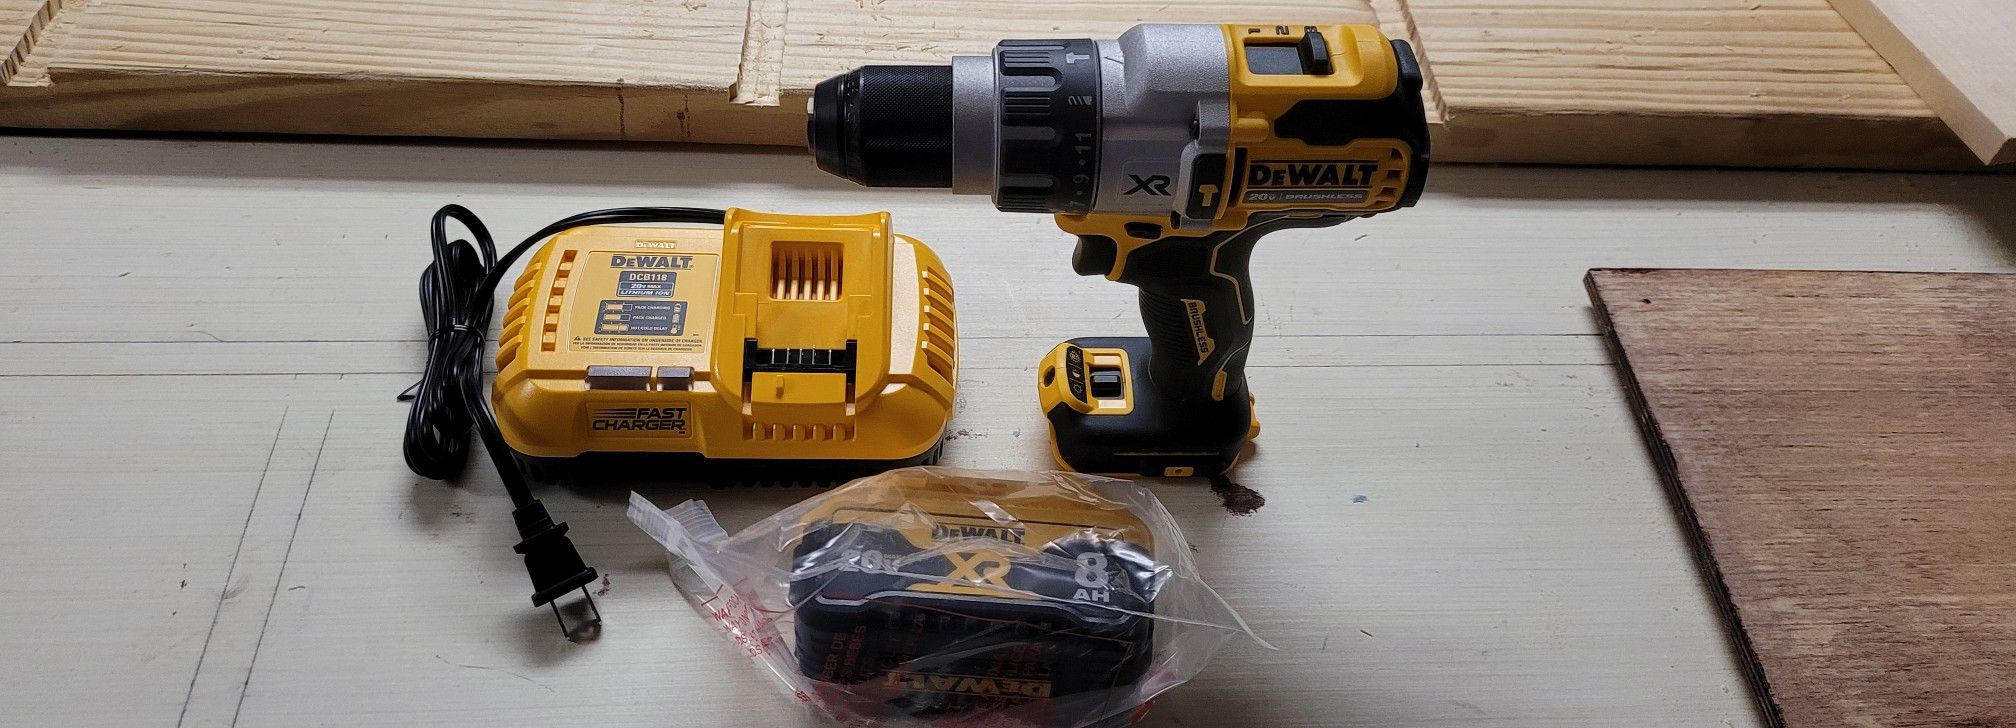 Dewalt 1/2" Hammerdrill with Battery and Charger